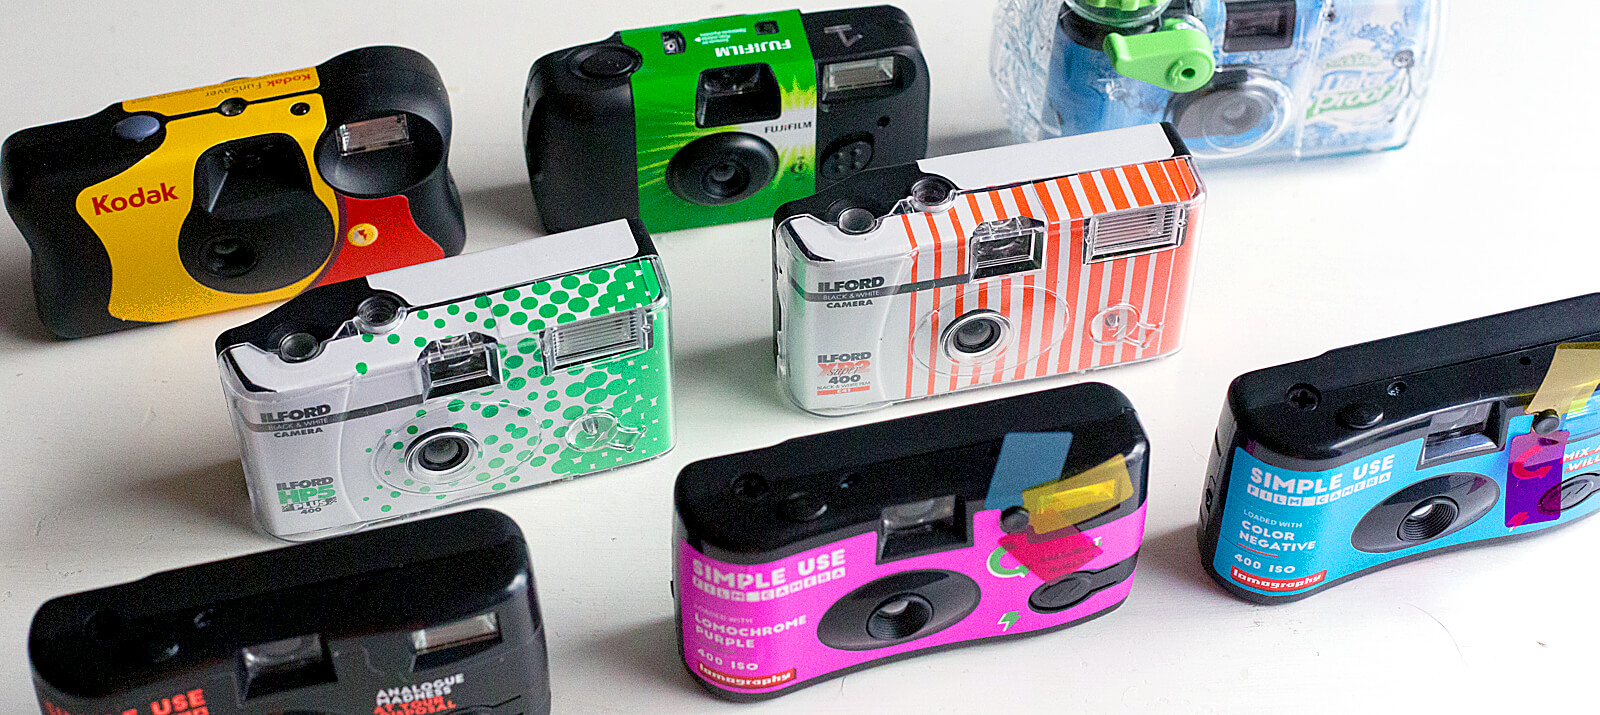 Hol Riskant Mars Disposable Cameras of 2021 - The Top Single Use Cameras Reviewed, Ranked  and Compared